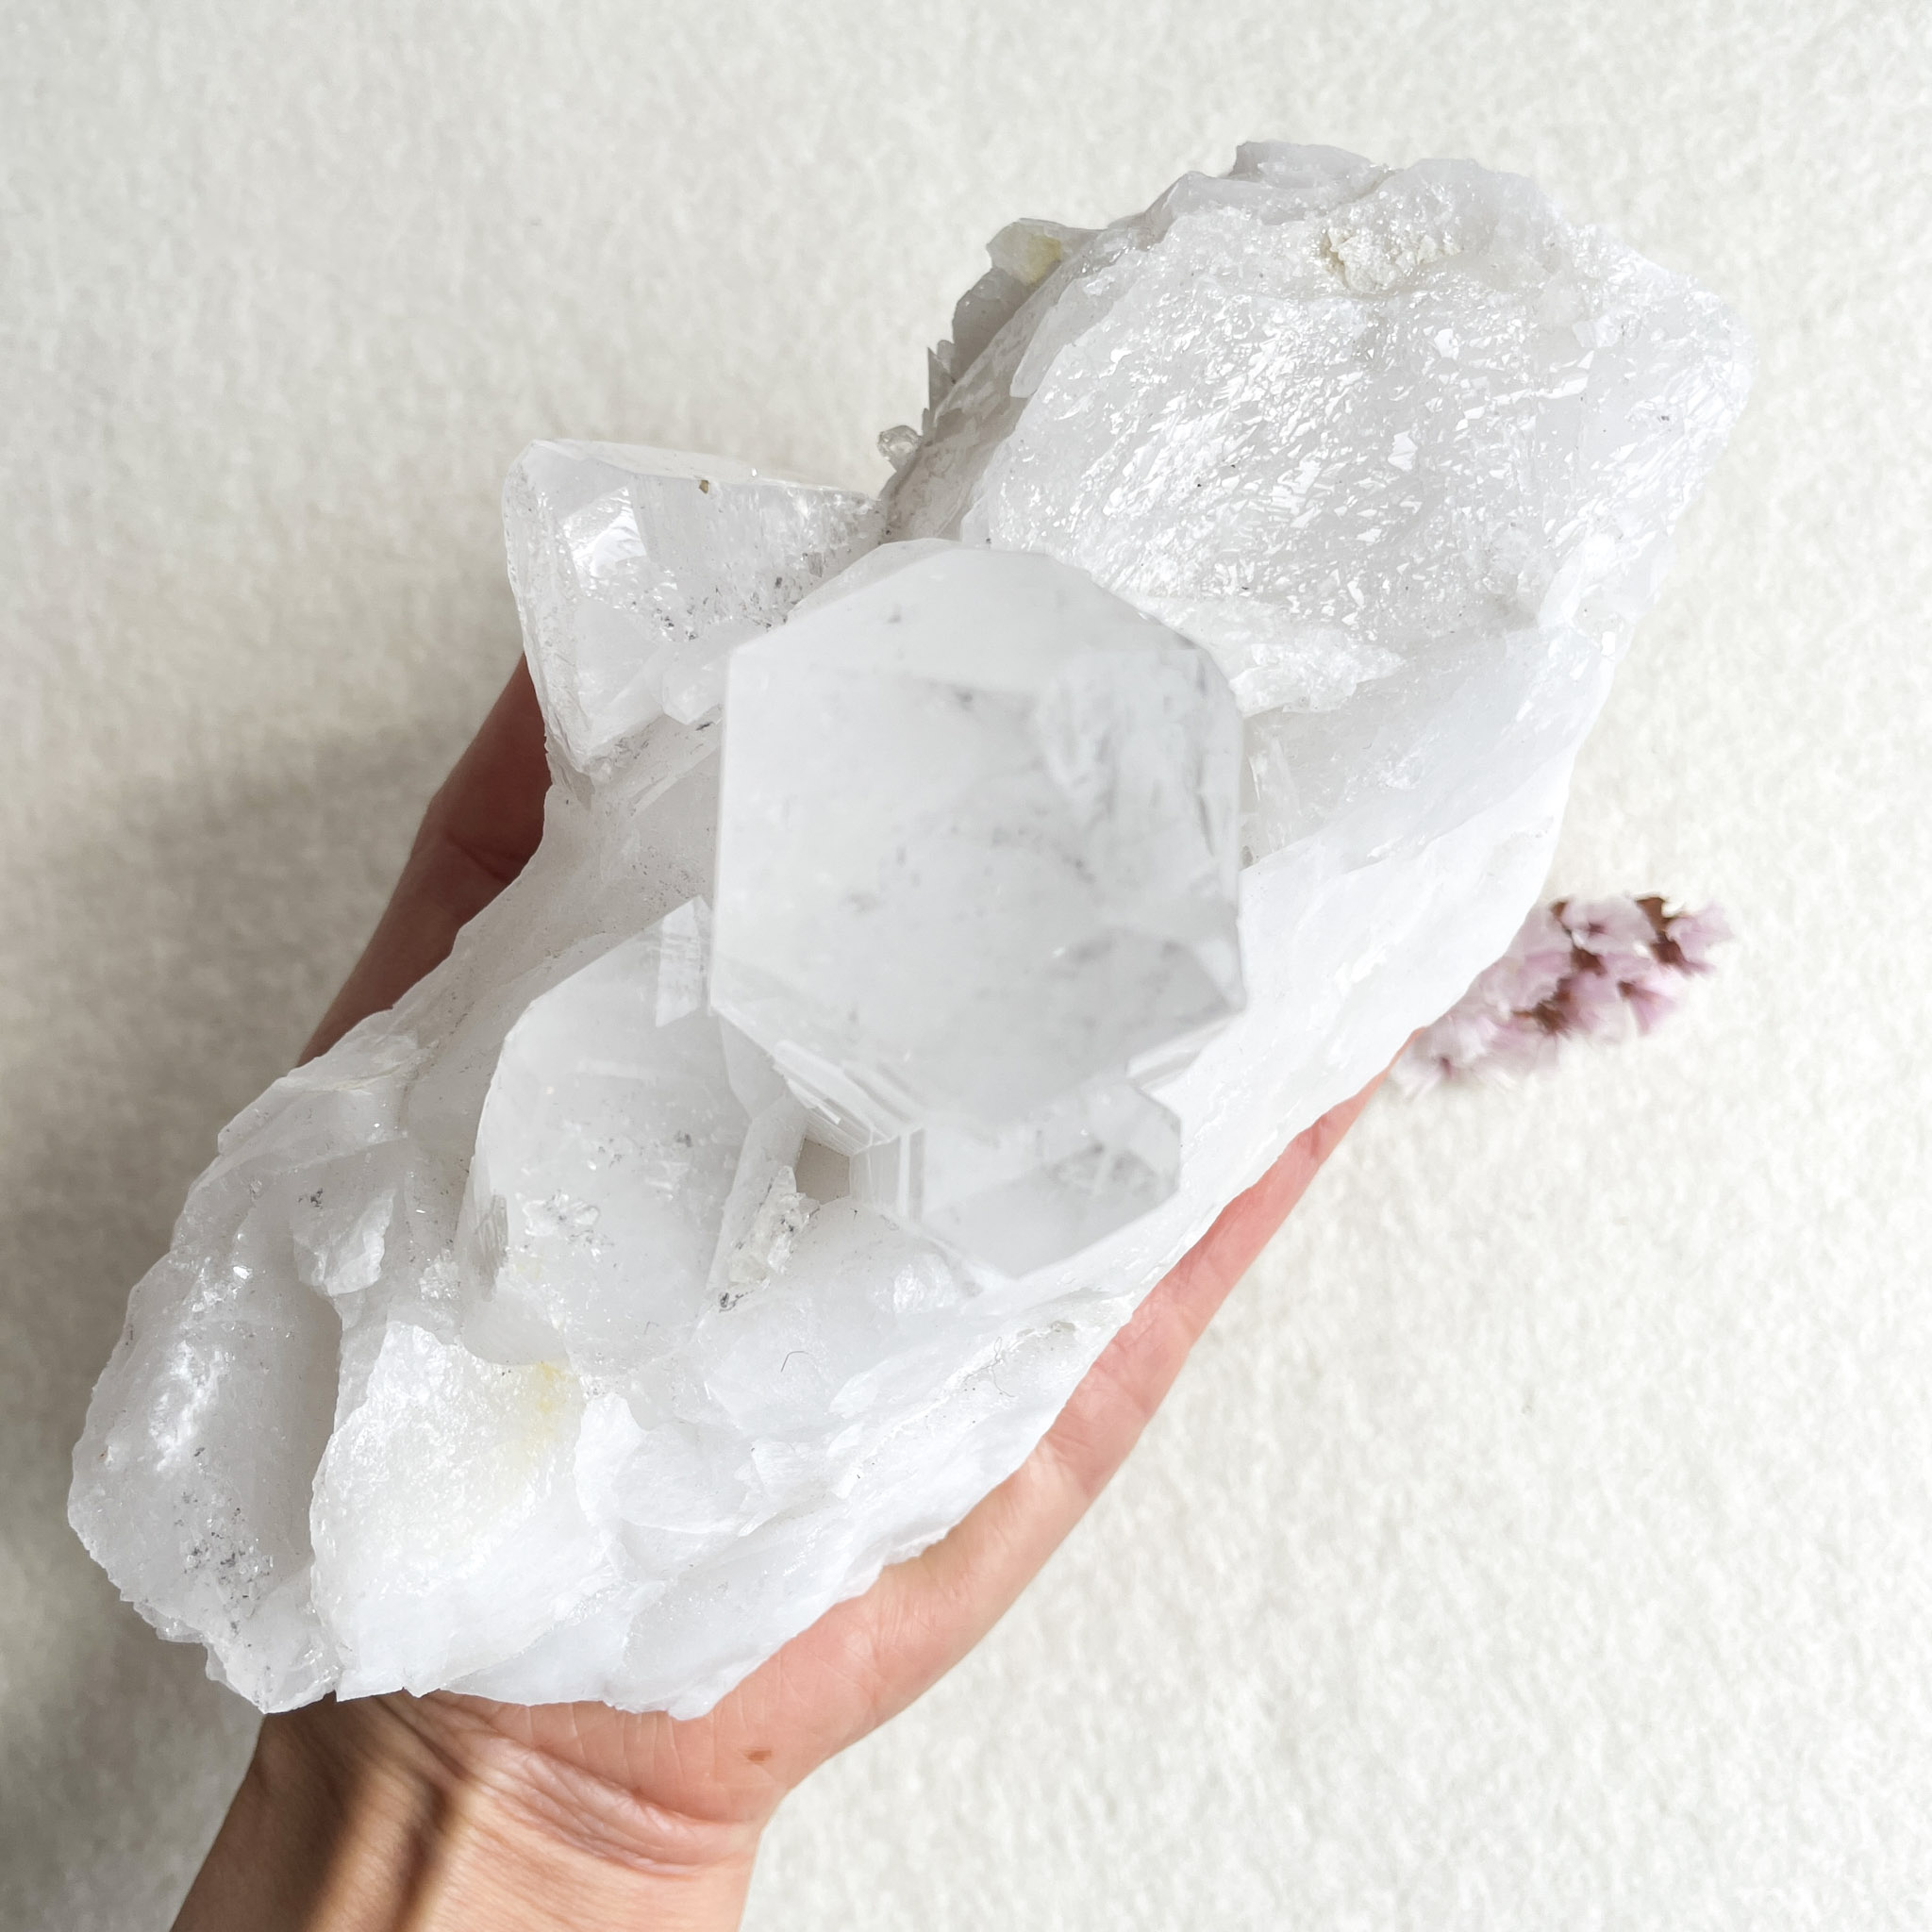 A person holding a large, clear crystal with multiple facets and edges in the palm of their hand.